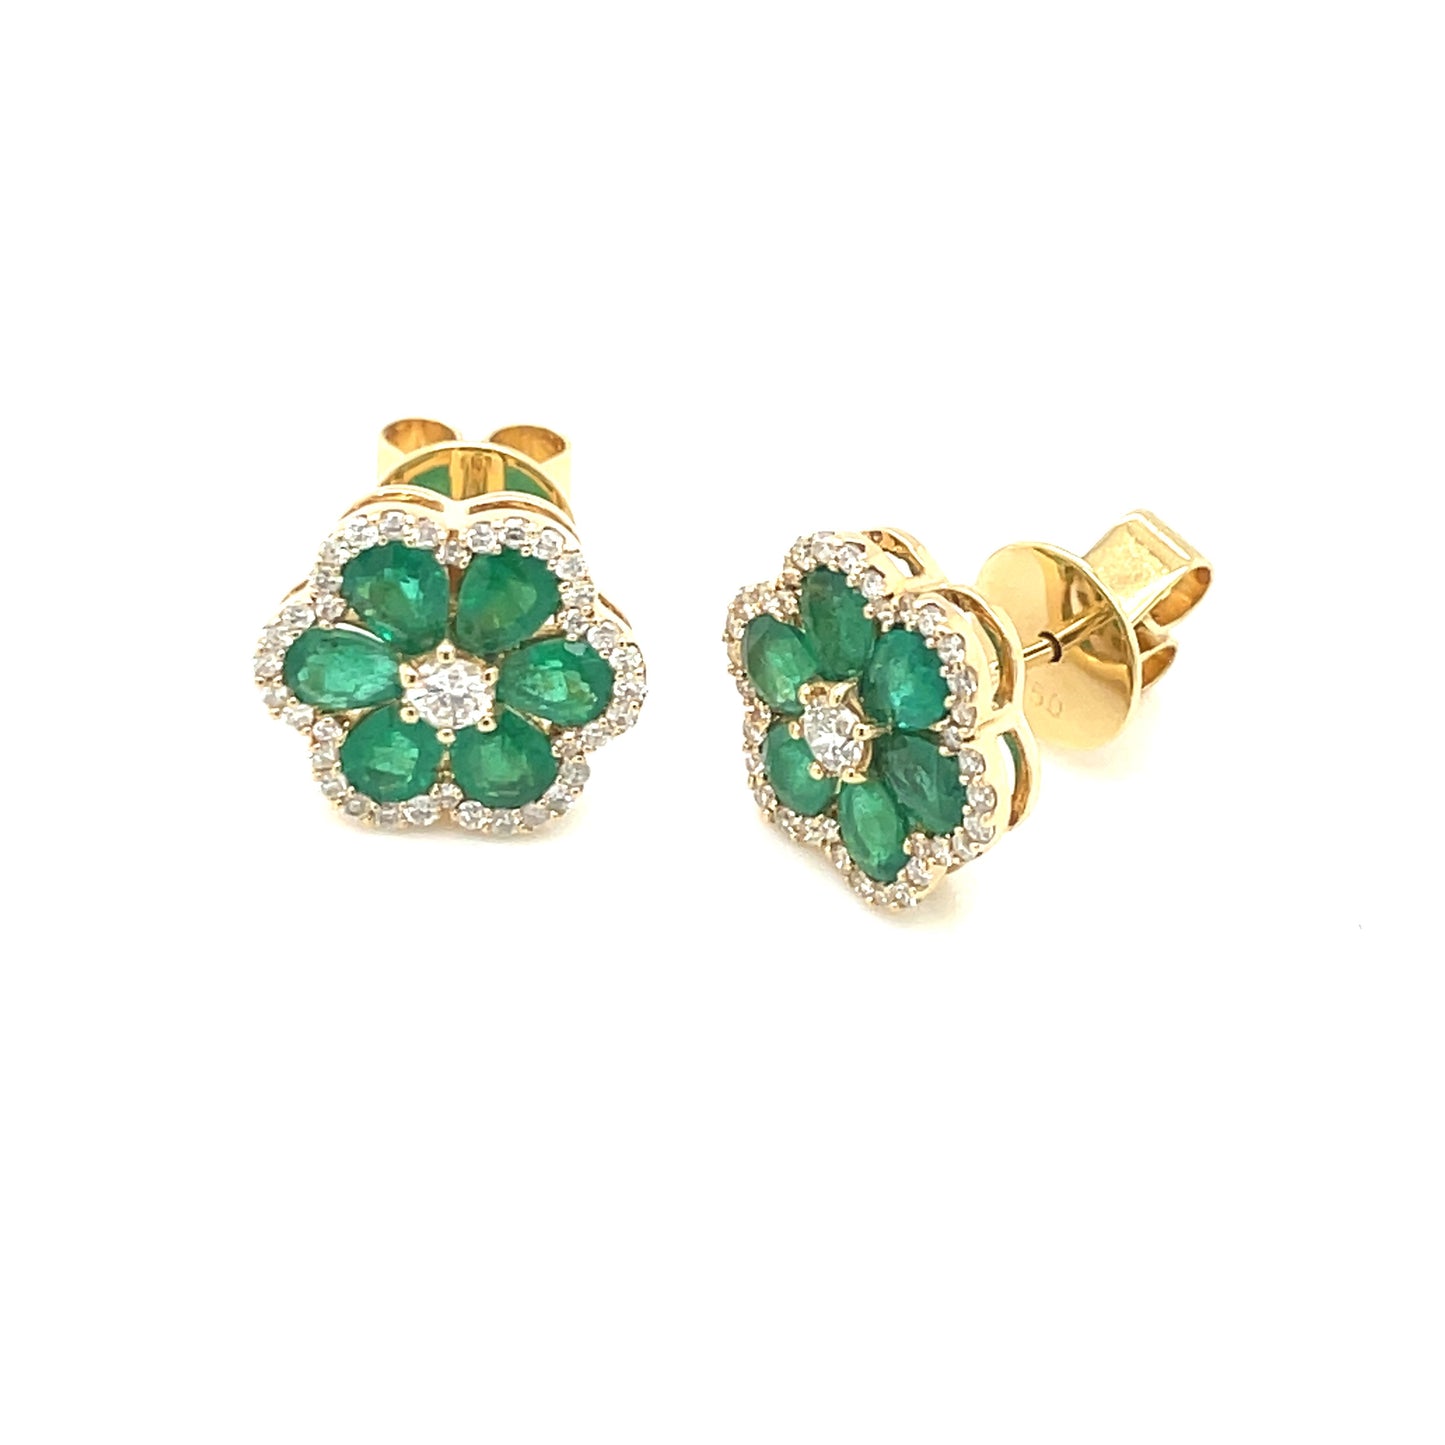 YELLOW GOLD EMERALD AND DIAMOND FLOWER EARRINGS